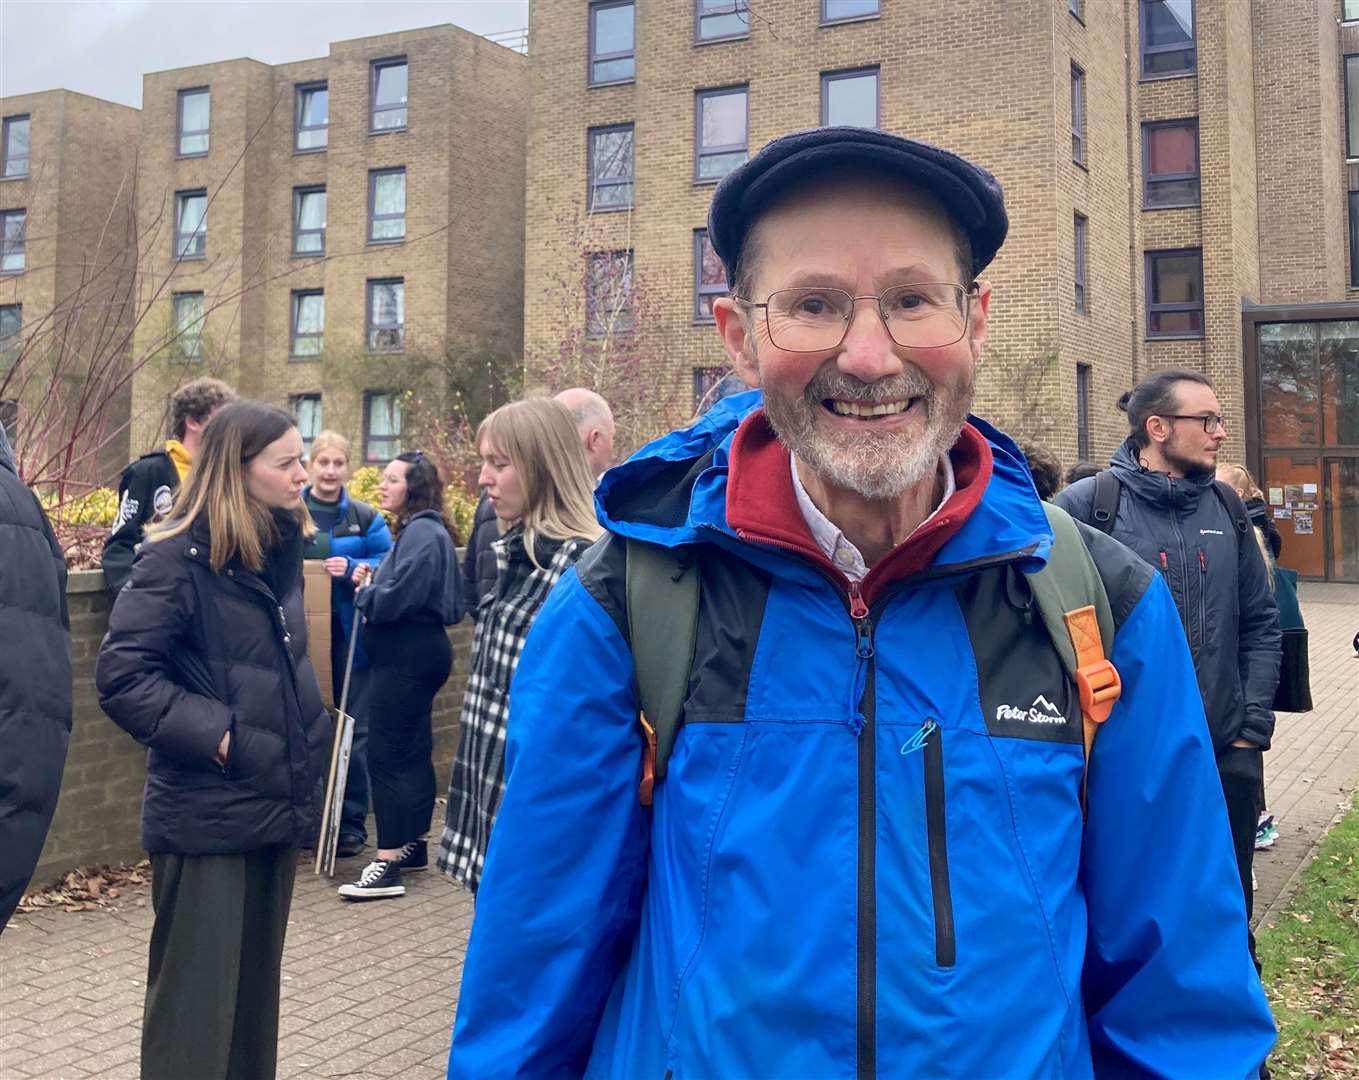 Emeritus professor Peter Taylor-Gooby OBE joins the protests at the University of Kent